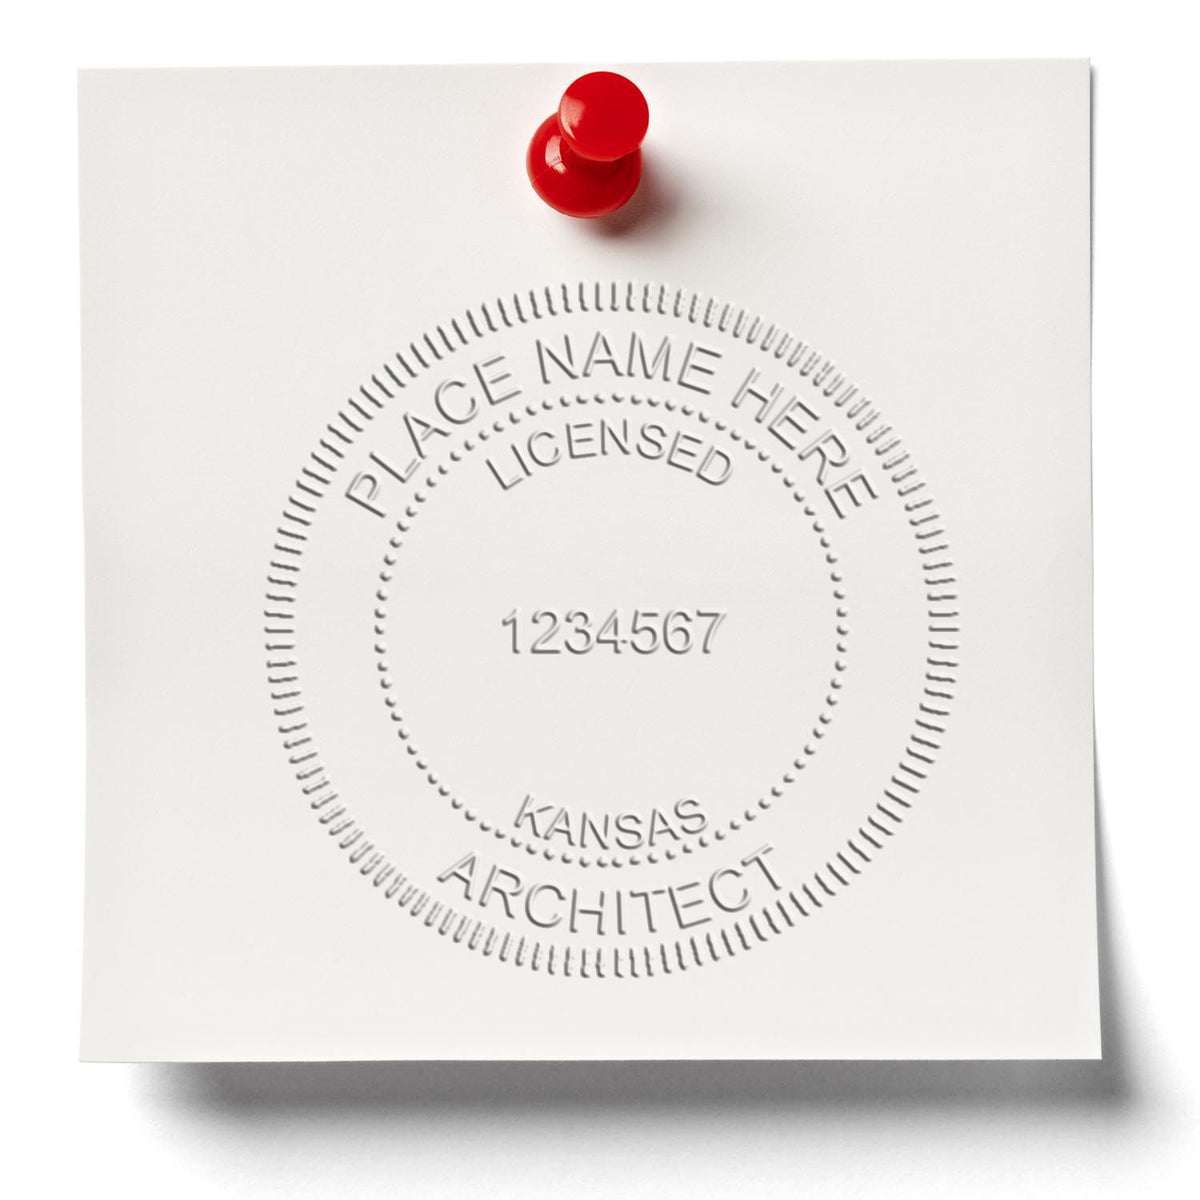 The Gift Kansas Architect Seal stamp impression comes to life with a crisp, detailed image stamped on paper - showcasing true professional quality.